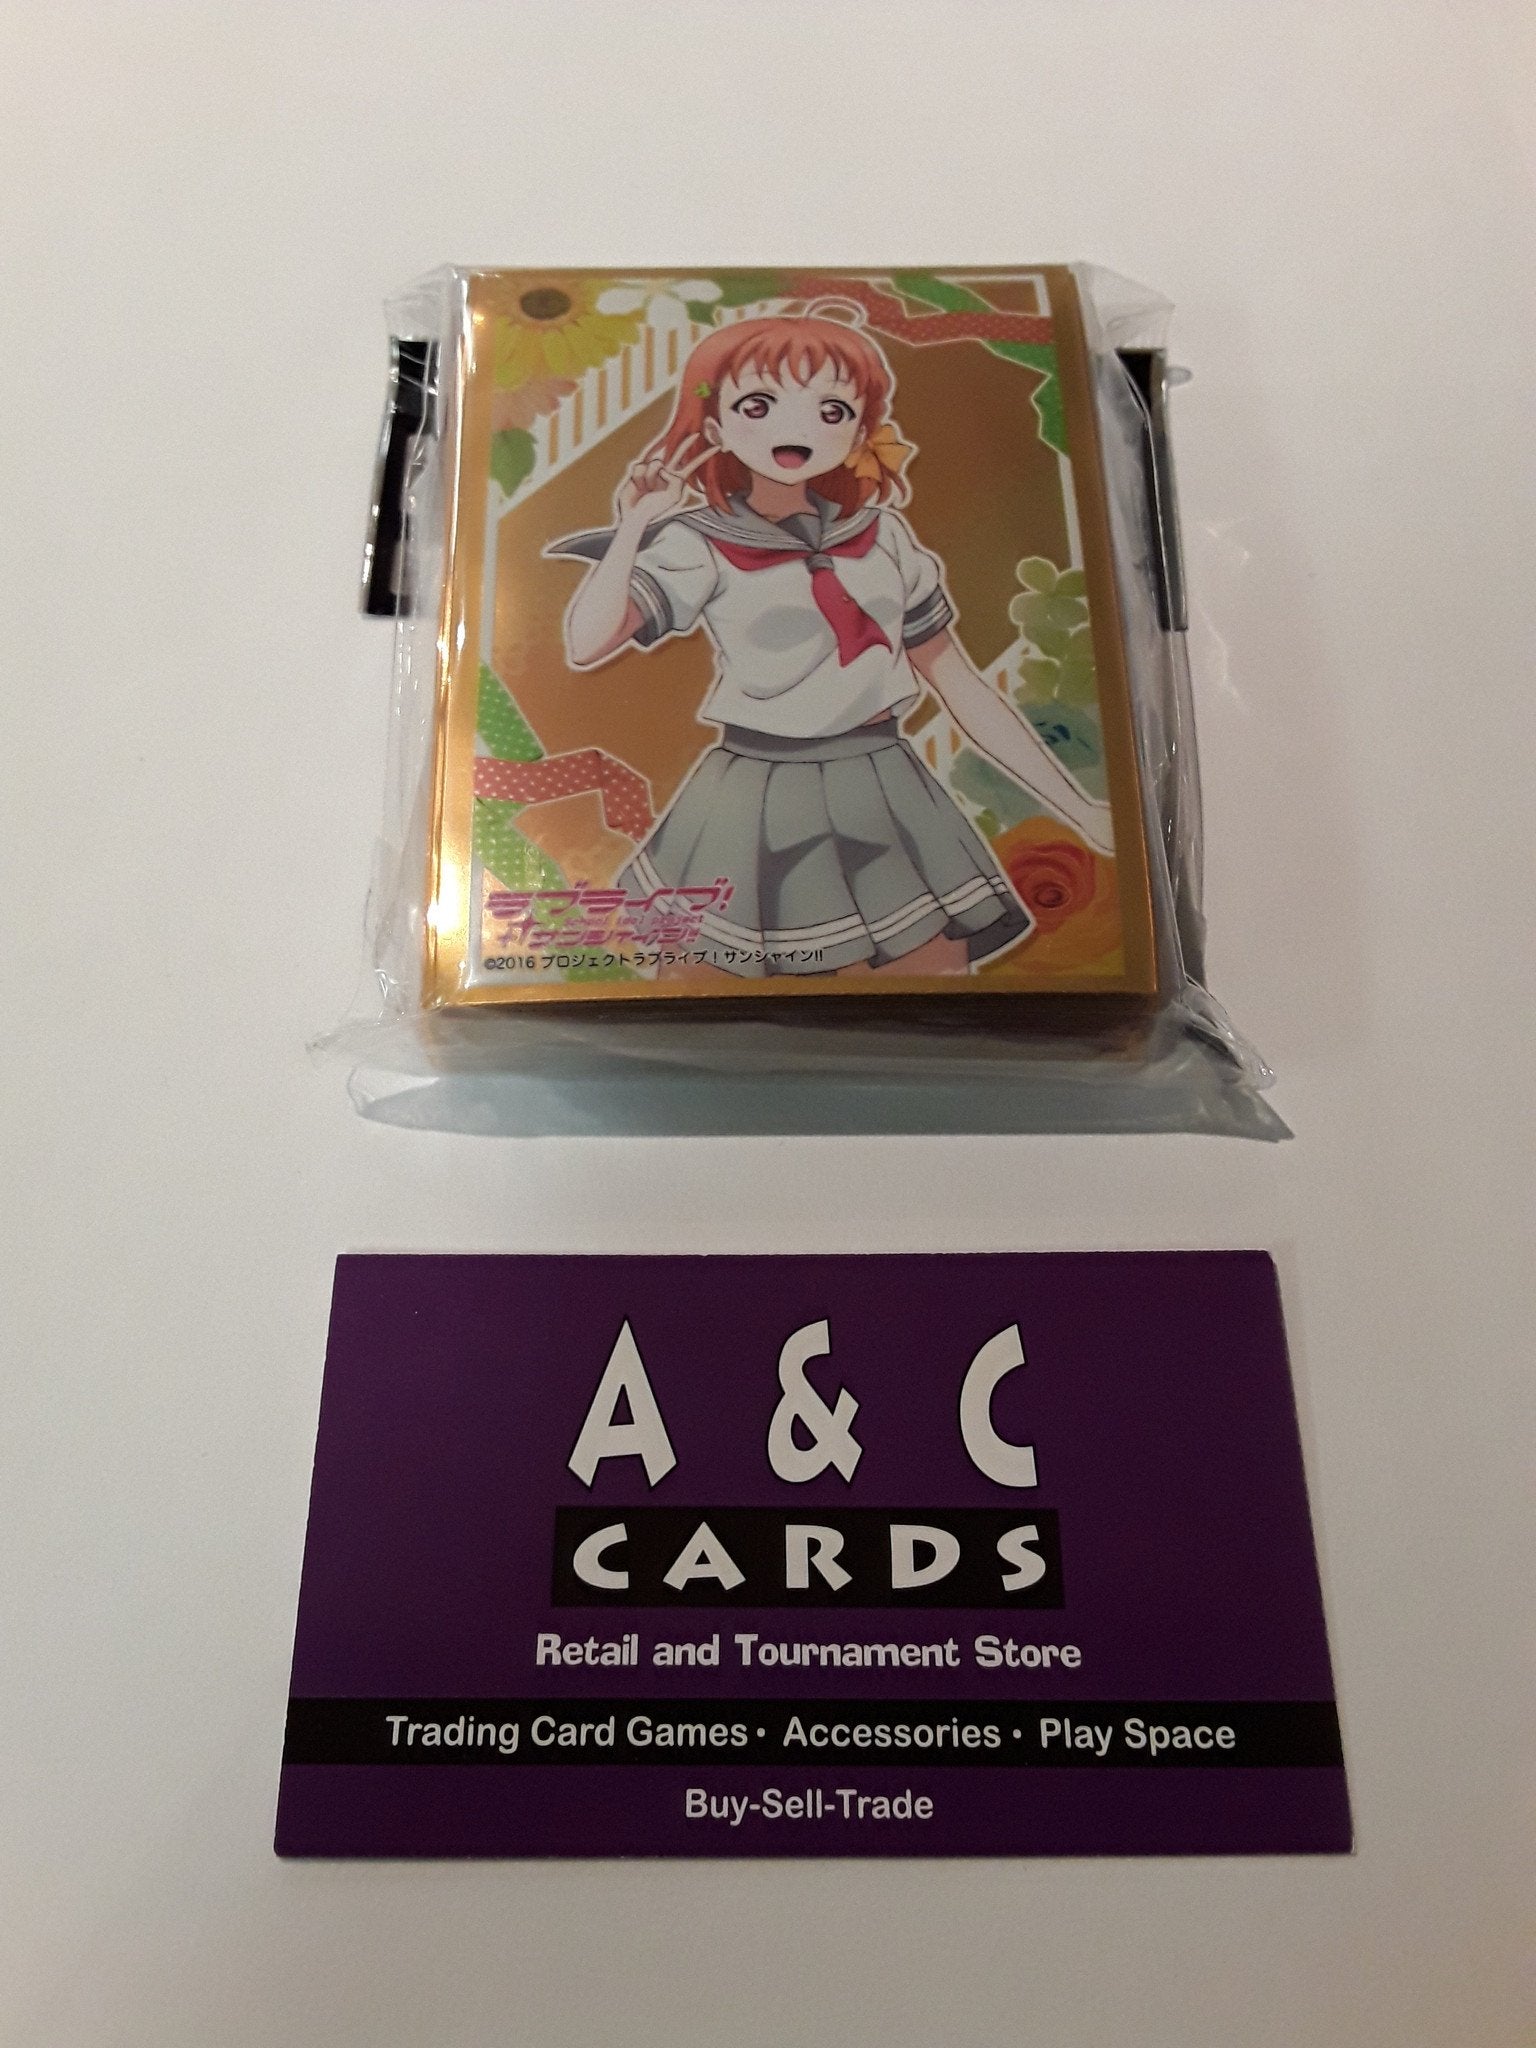 Character Sleeves "Chika Takami" #1 - 1 pack of Standard Size Sleeves 60pc - Love Live Sunshine